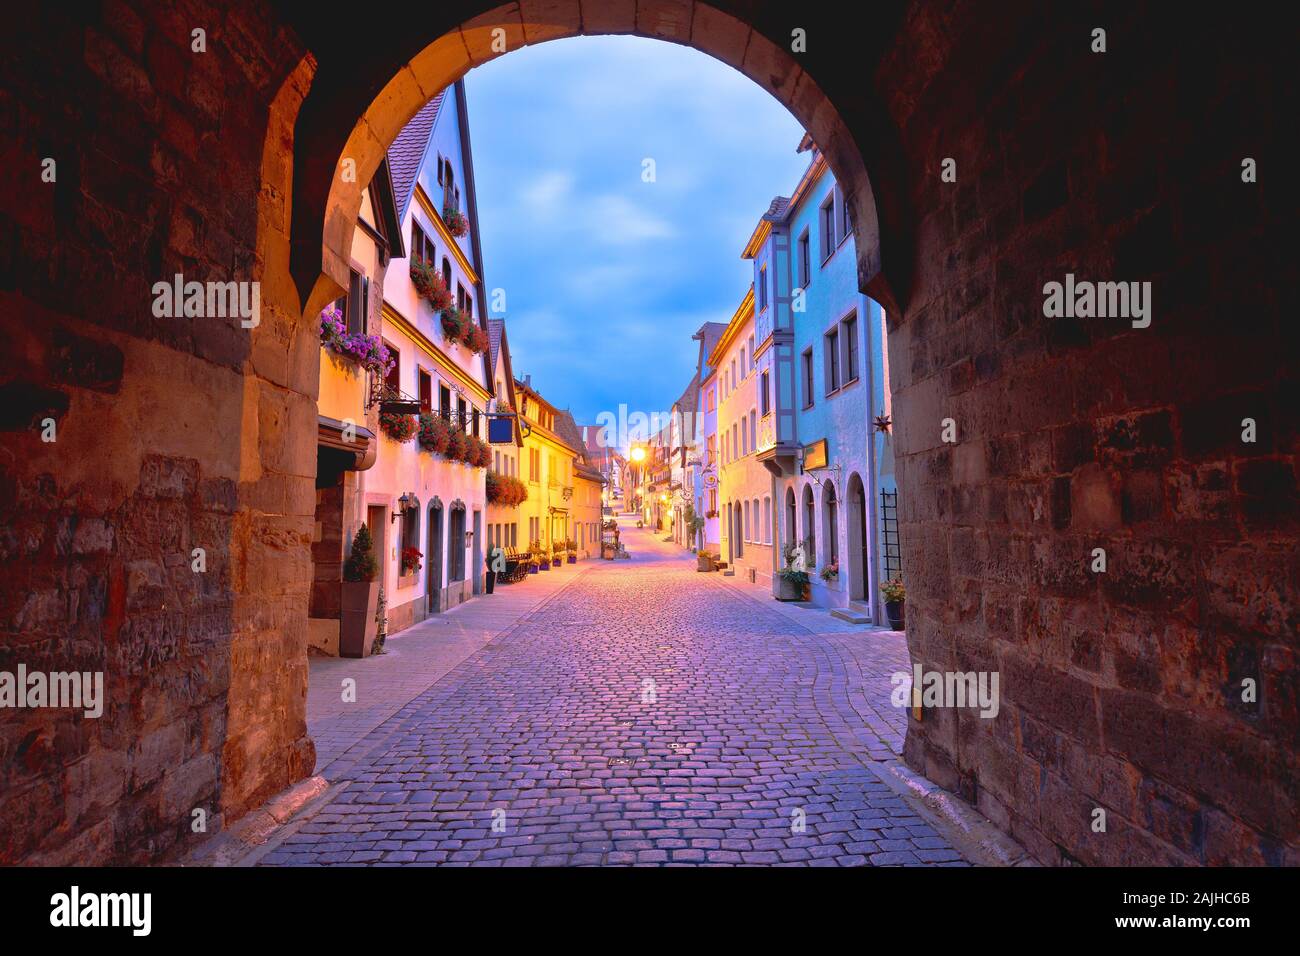 Cobbled street of historic town of Rothenburg ob der Tauber dawn view, Romantic road of Bavaria region of Germany Stock Photo